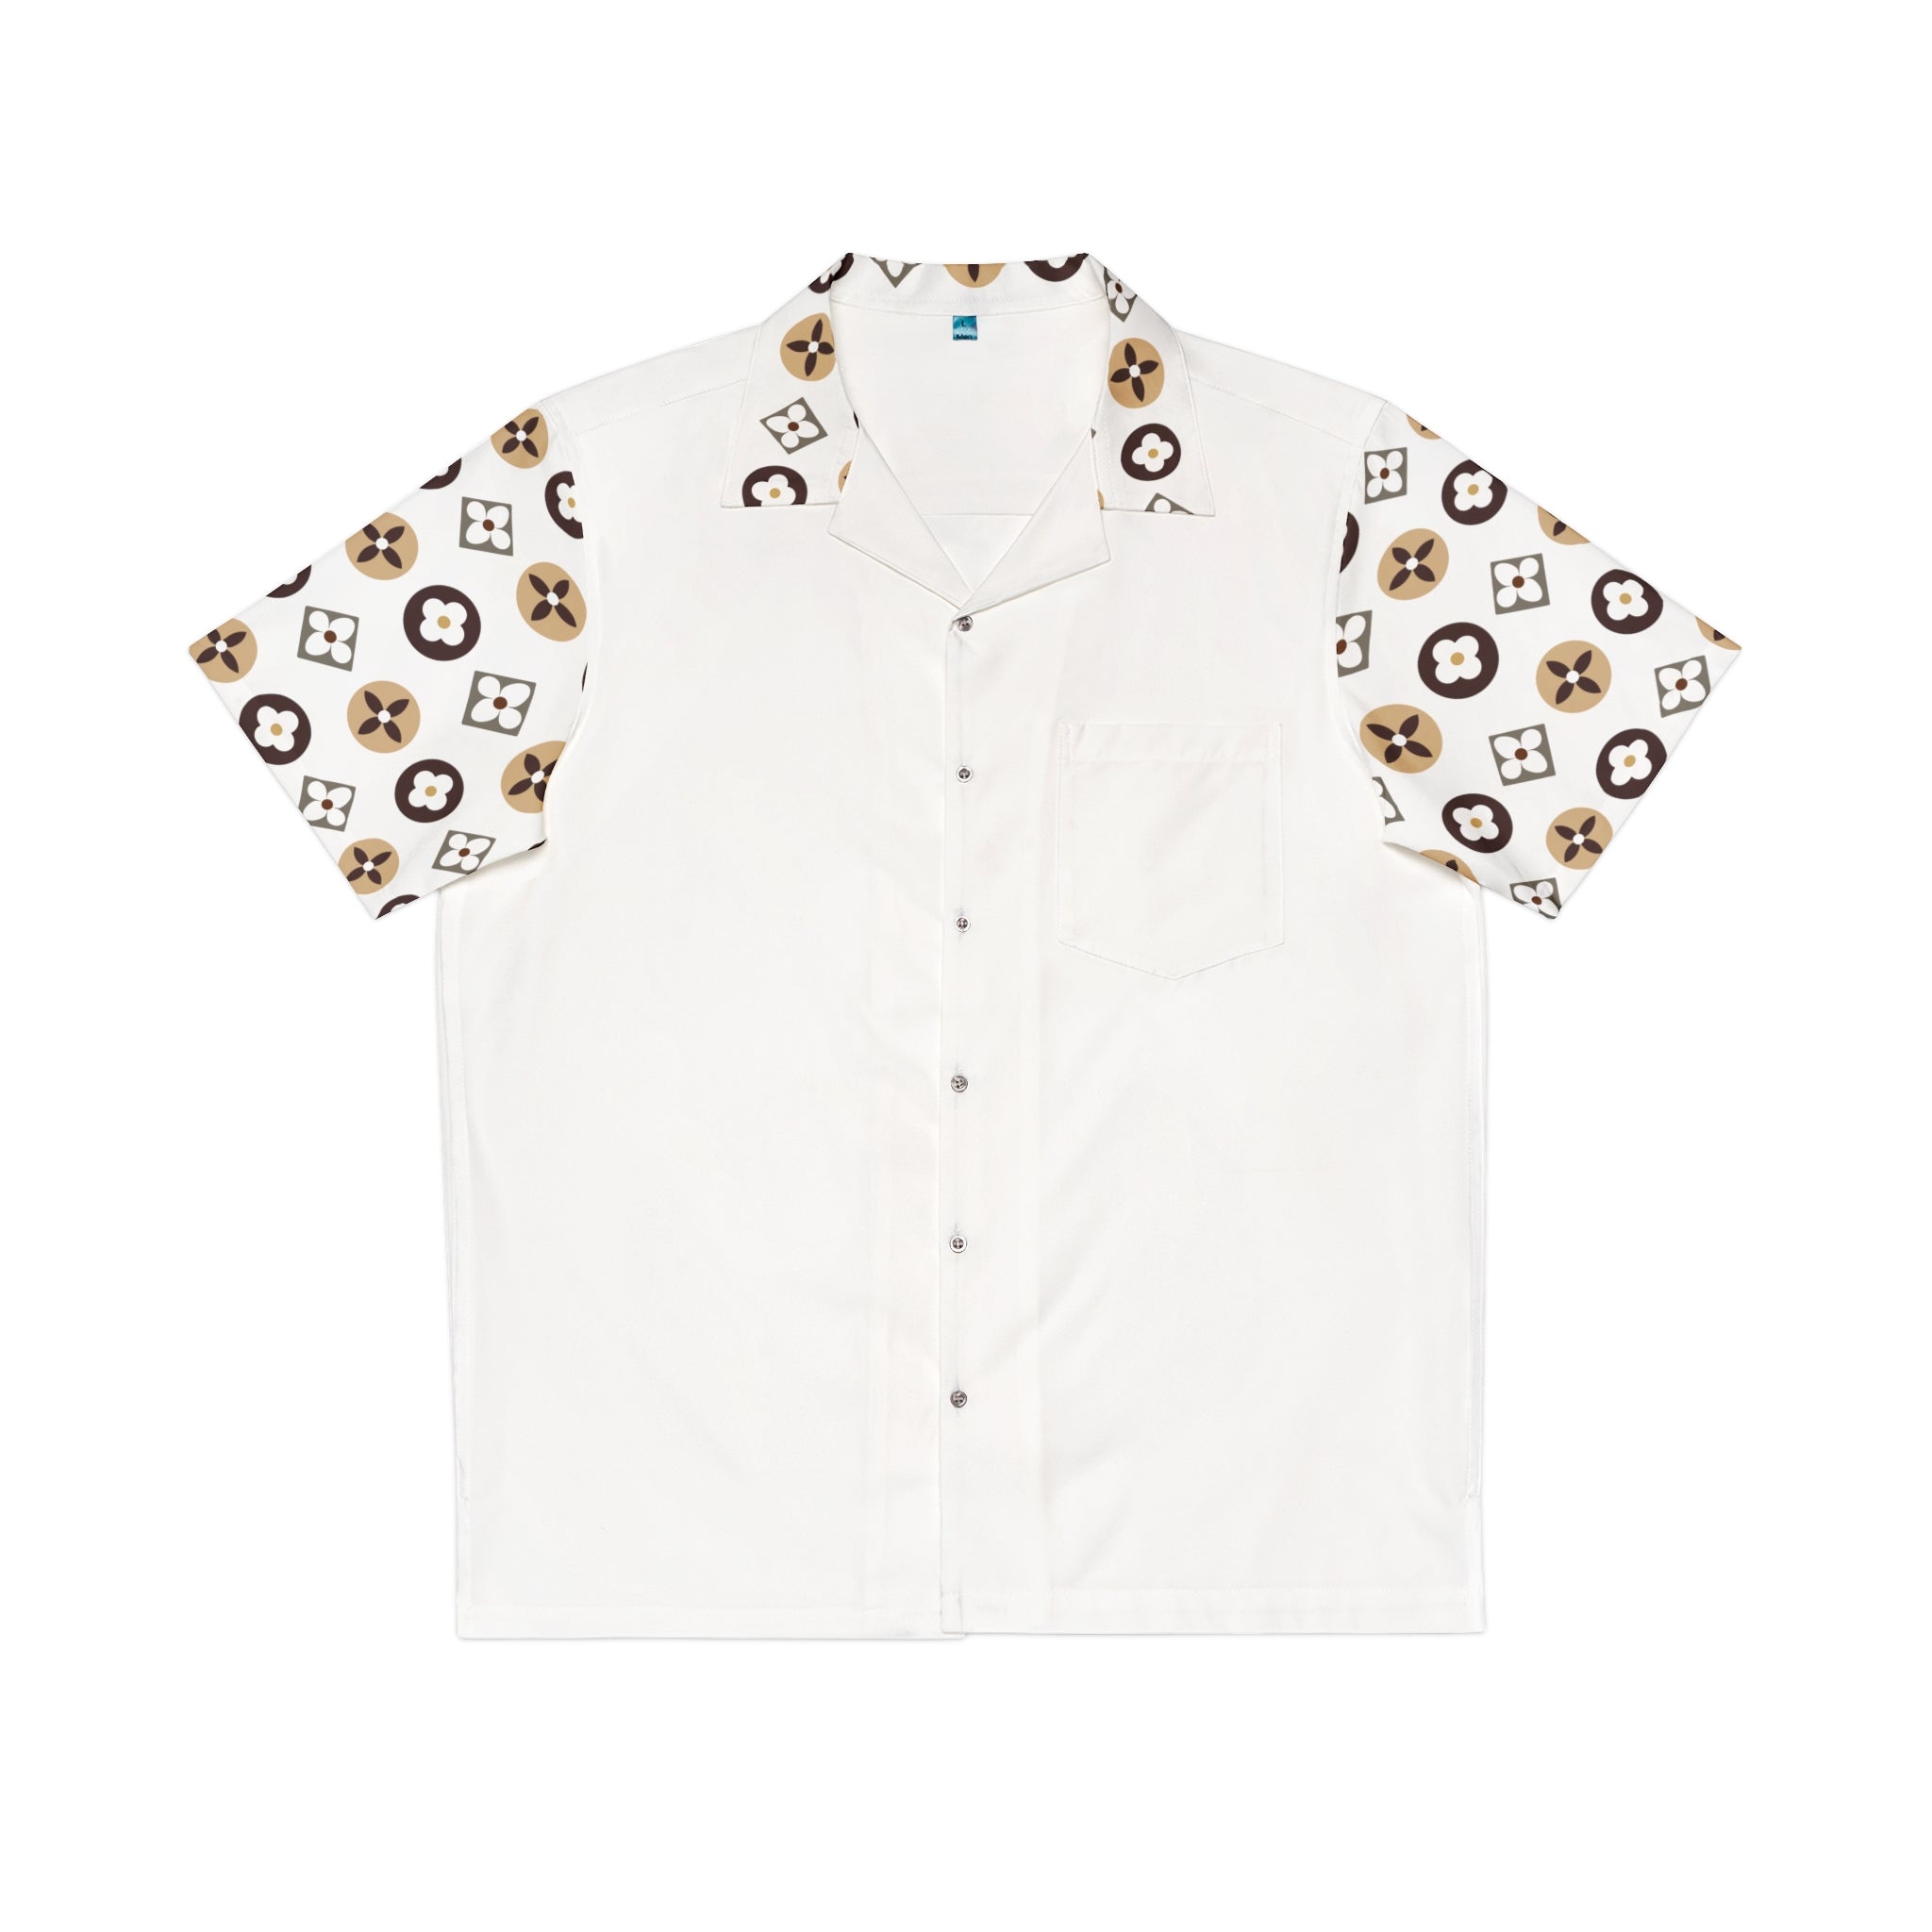 Groove Collection Trilogy of Icons Solid Block (Browns) White Unisex Gender Neutral Button Up Shirt, Hawaiian Shirt